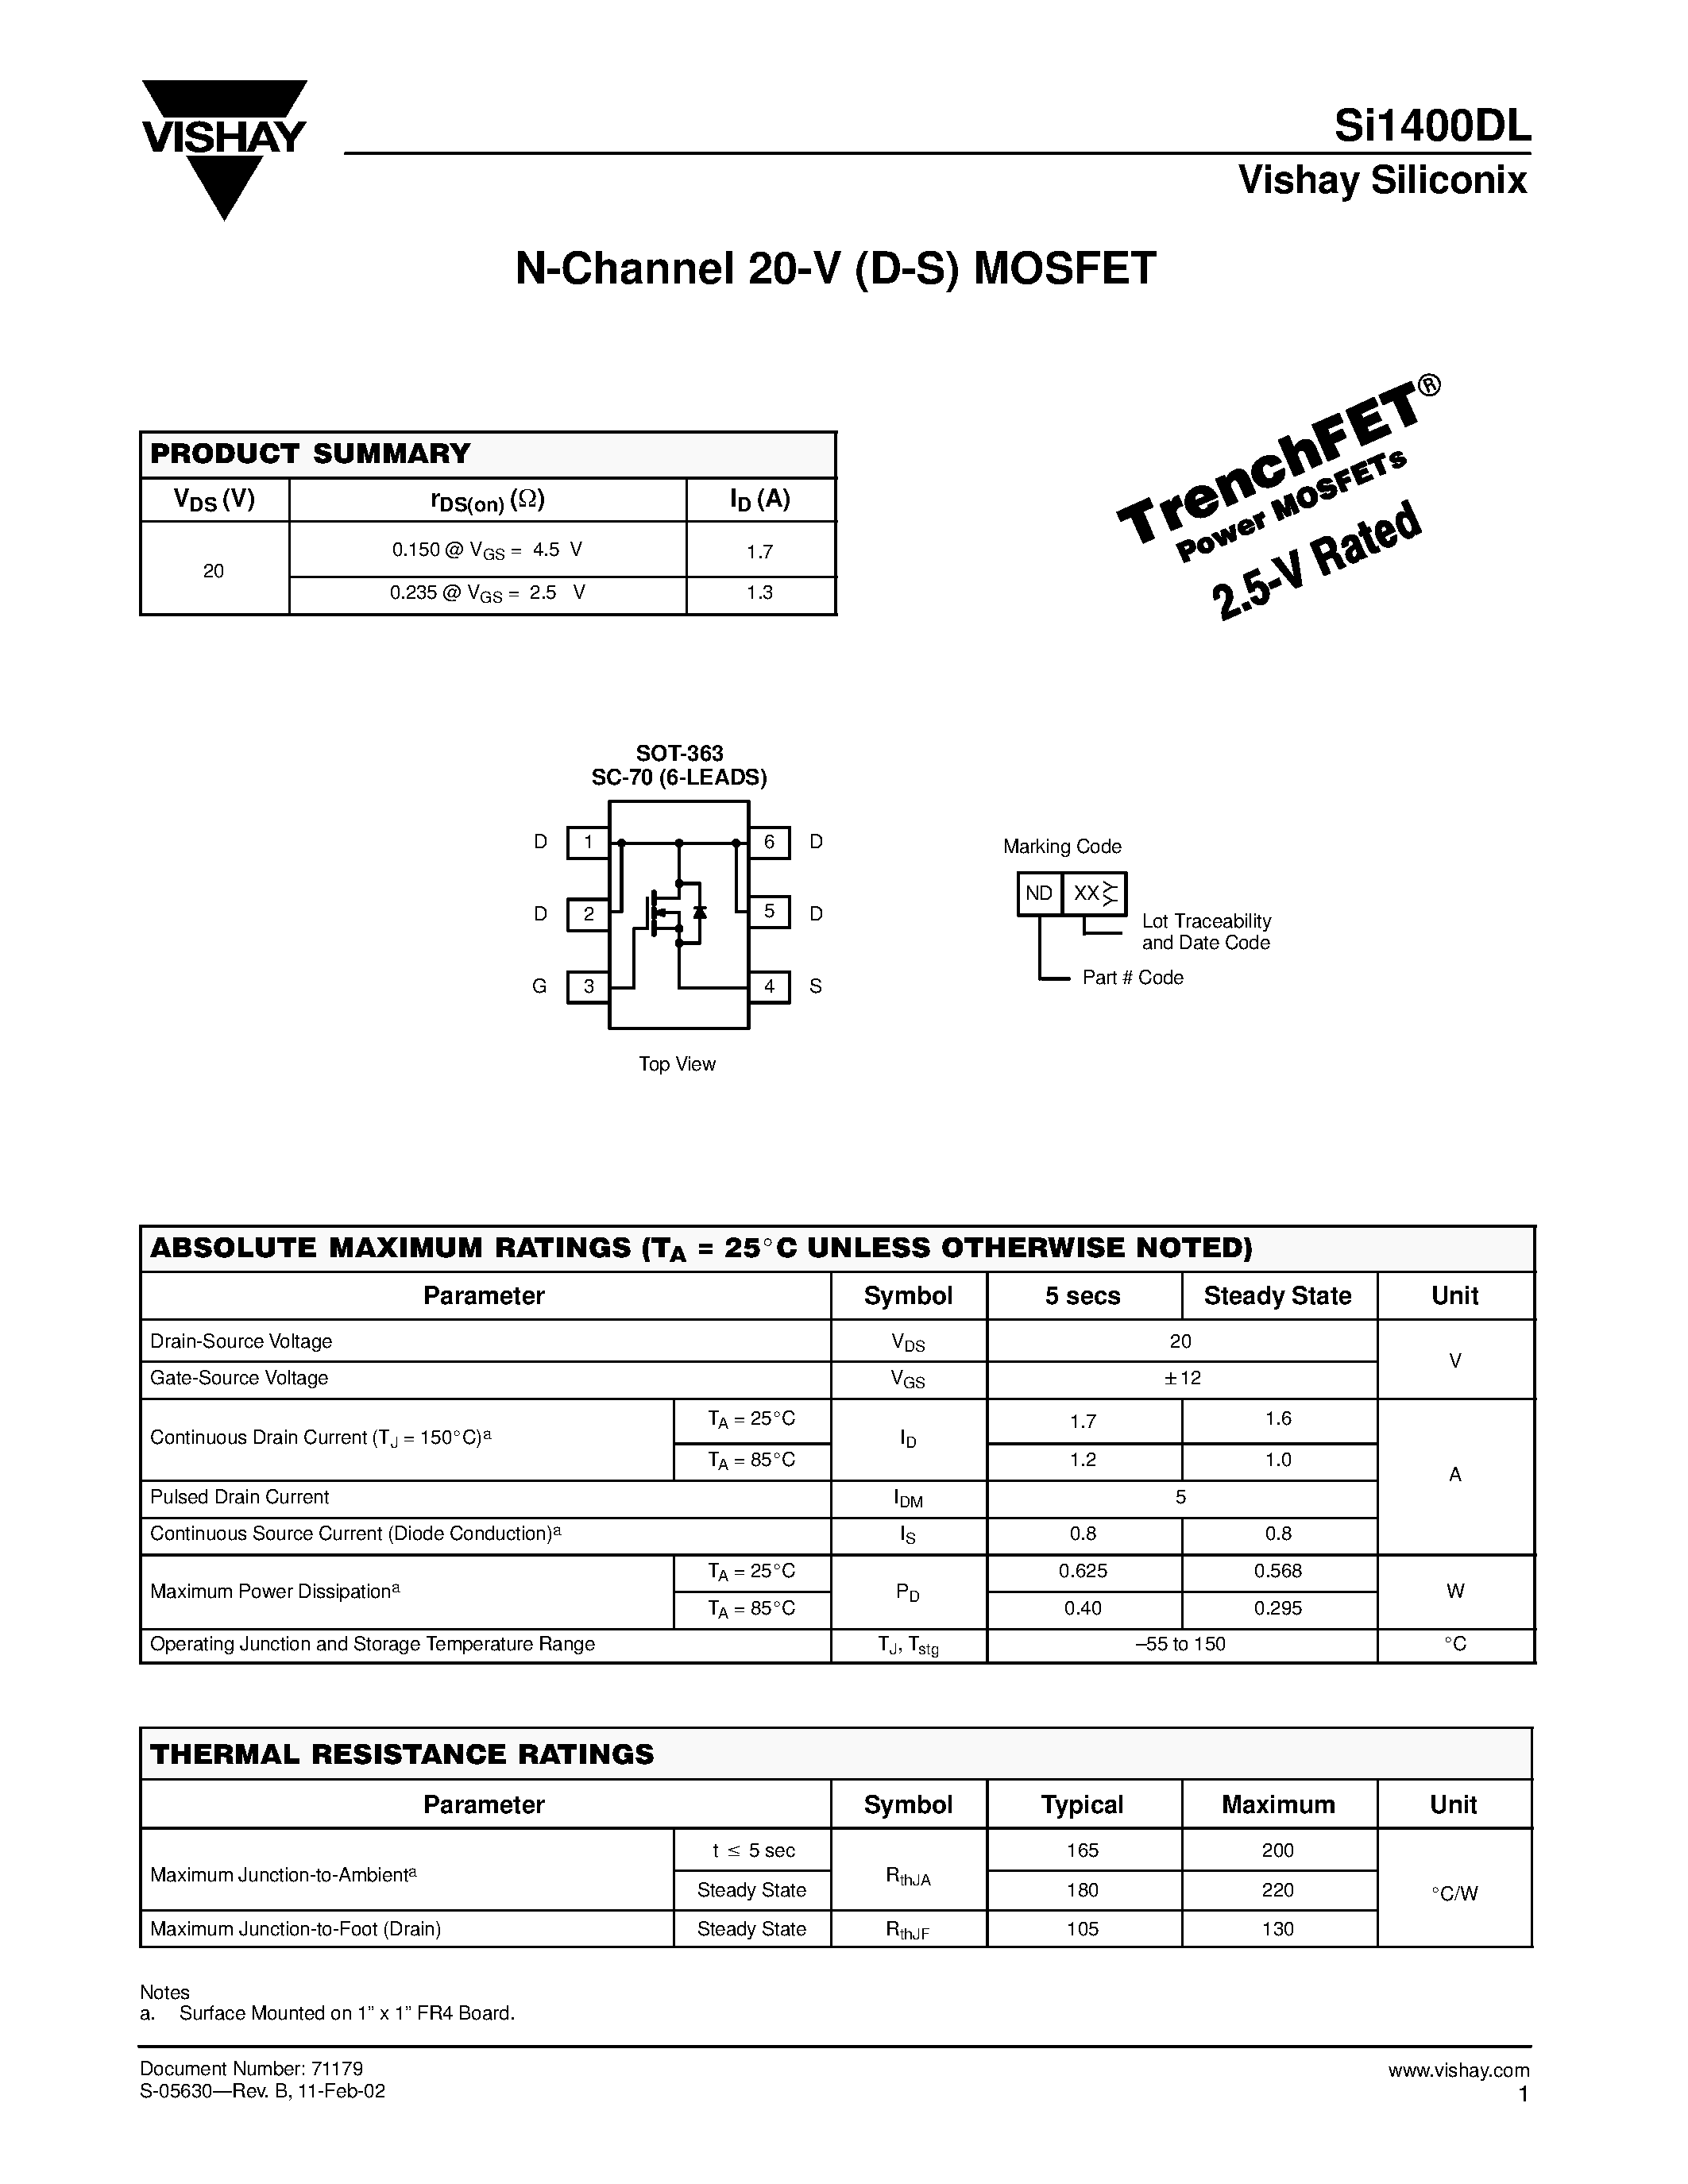 Datasheet SI1400DL - N-Channel 20-V (D-S) MOSFET page 1